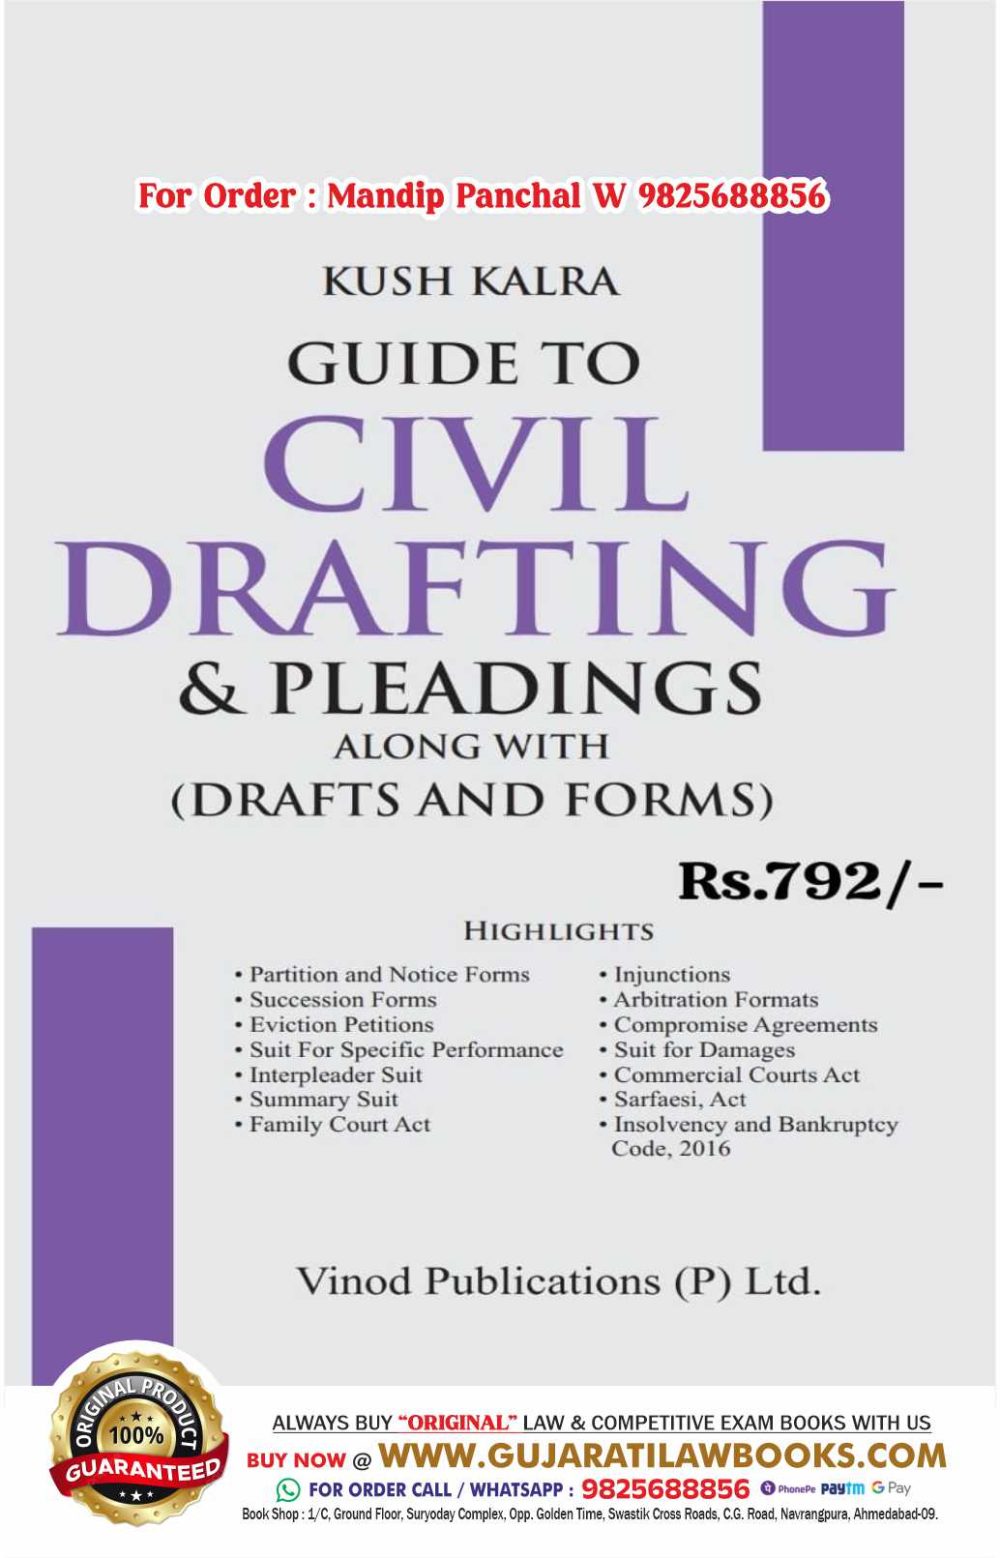 Guide to Civil Drafting & Pleadings Along With Drafts and Forms - by Kush Kalra - Latest March 2024 Edition Vinod